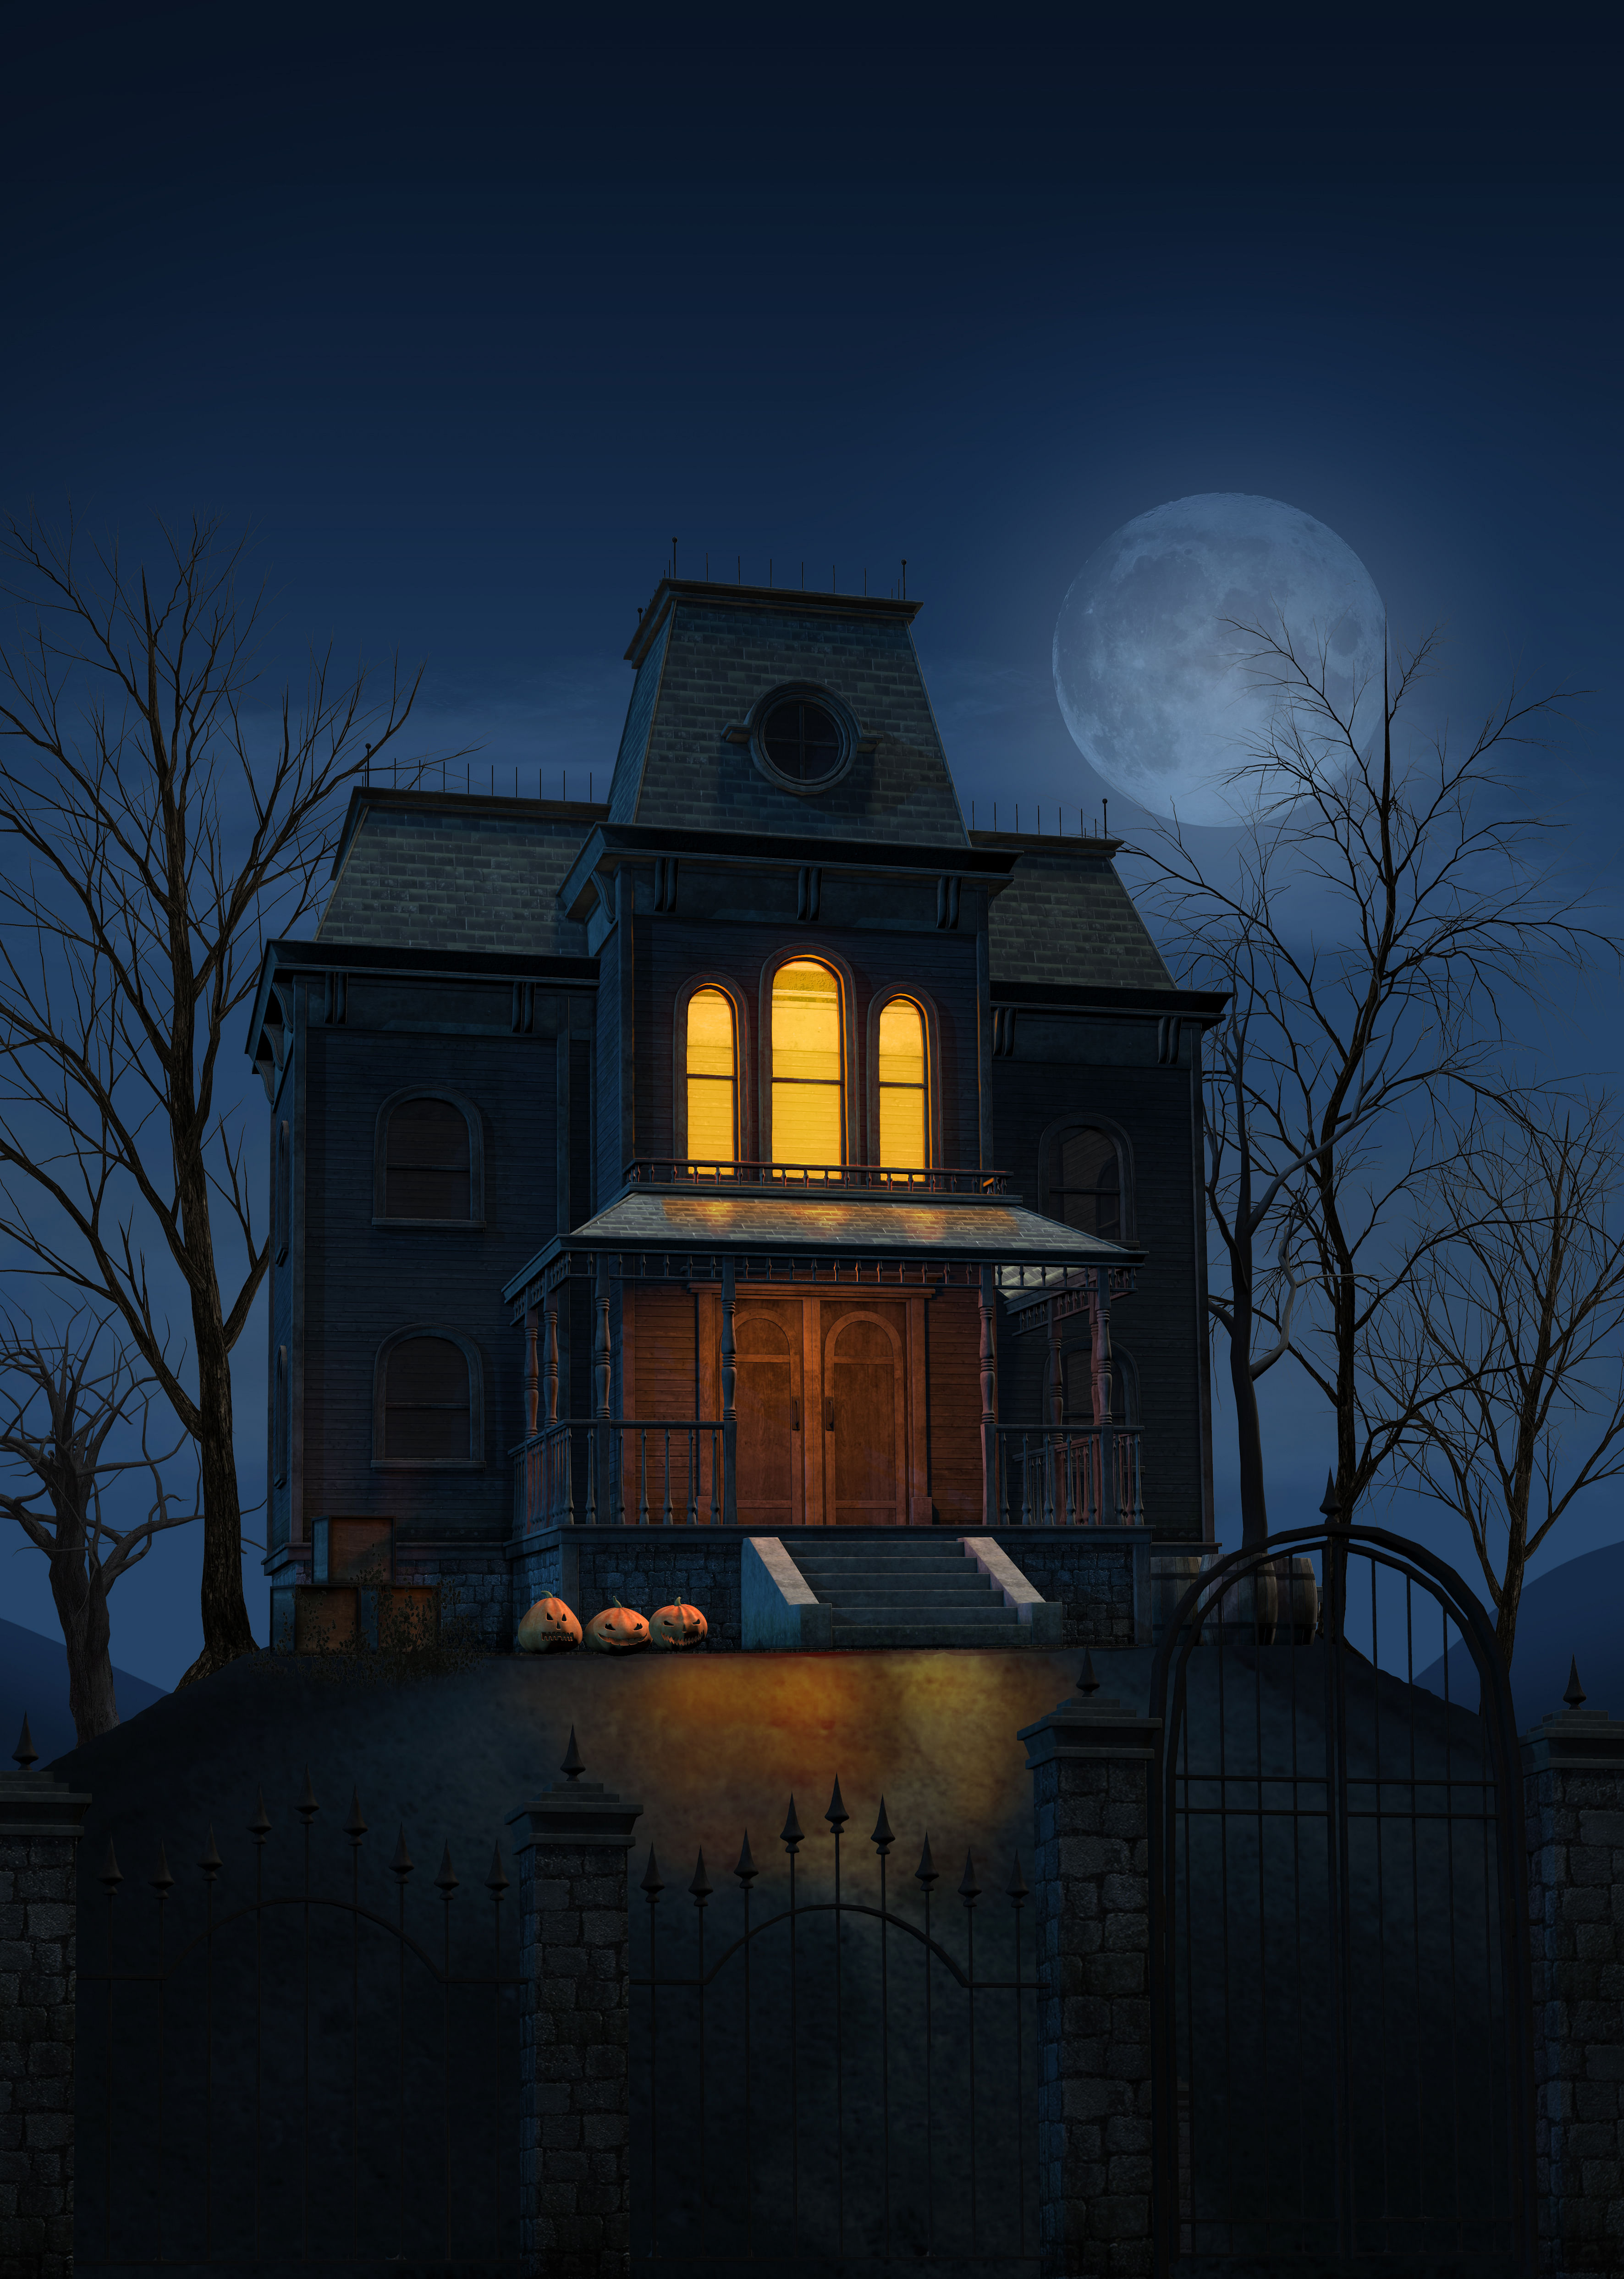 Halloween concept, a spooky haunted ghost house at full moon on a lonely hill, 3d render
Halloween concept, a spooky haunted ghost house at full moon on a lonely hill, 3d render.
